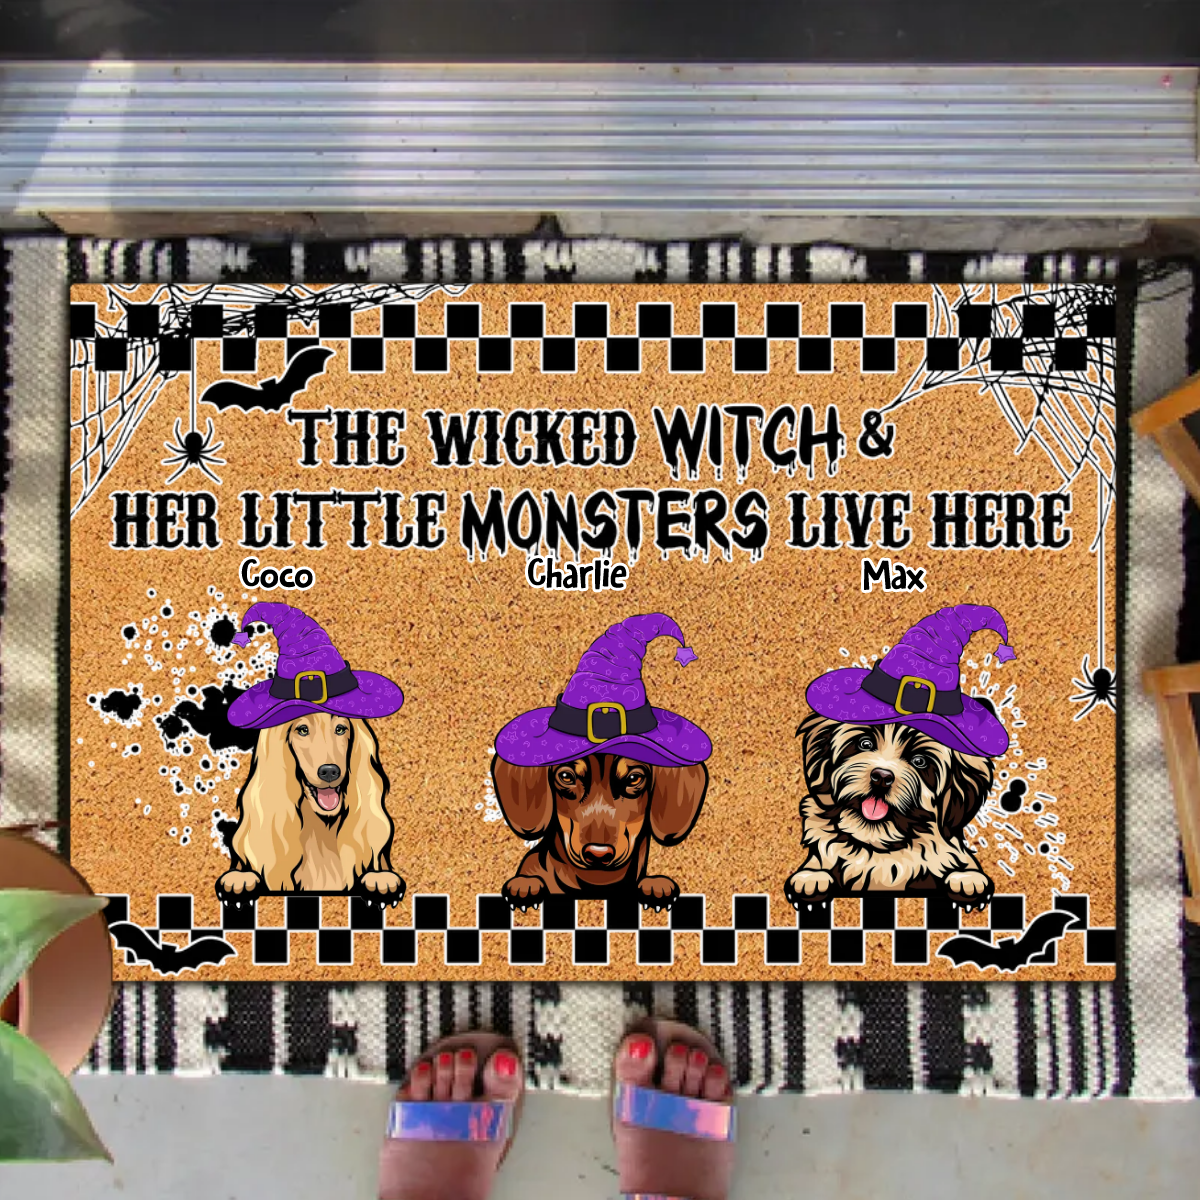 Wicked Witch Hologram Halloween Dogs Doormat, Dog Lover Gift AB